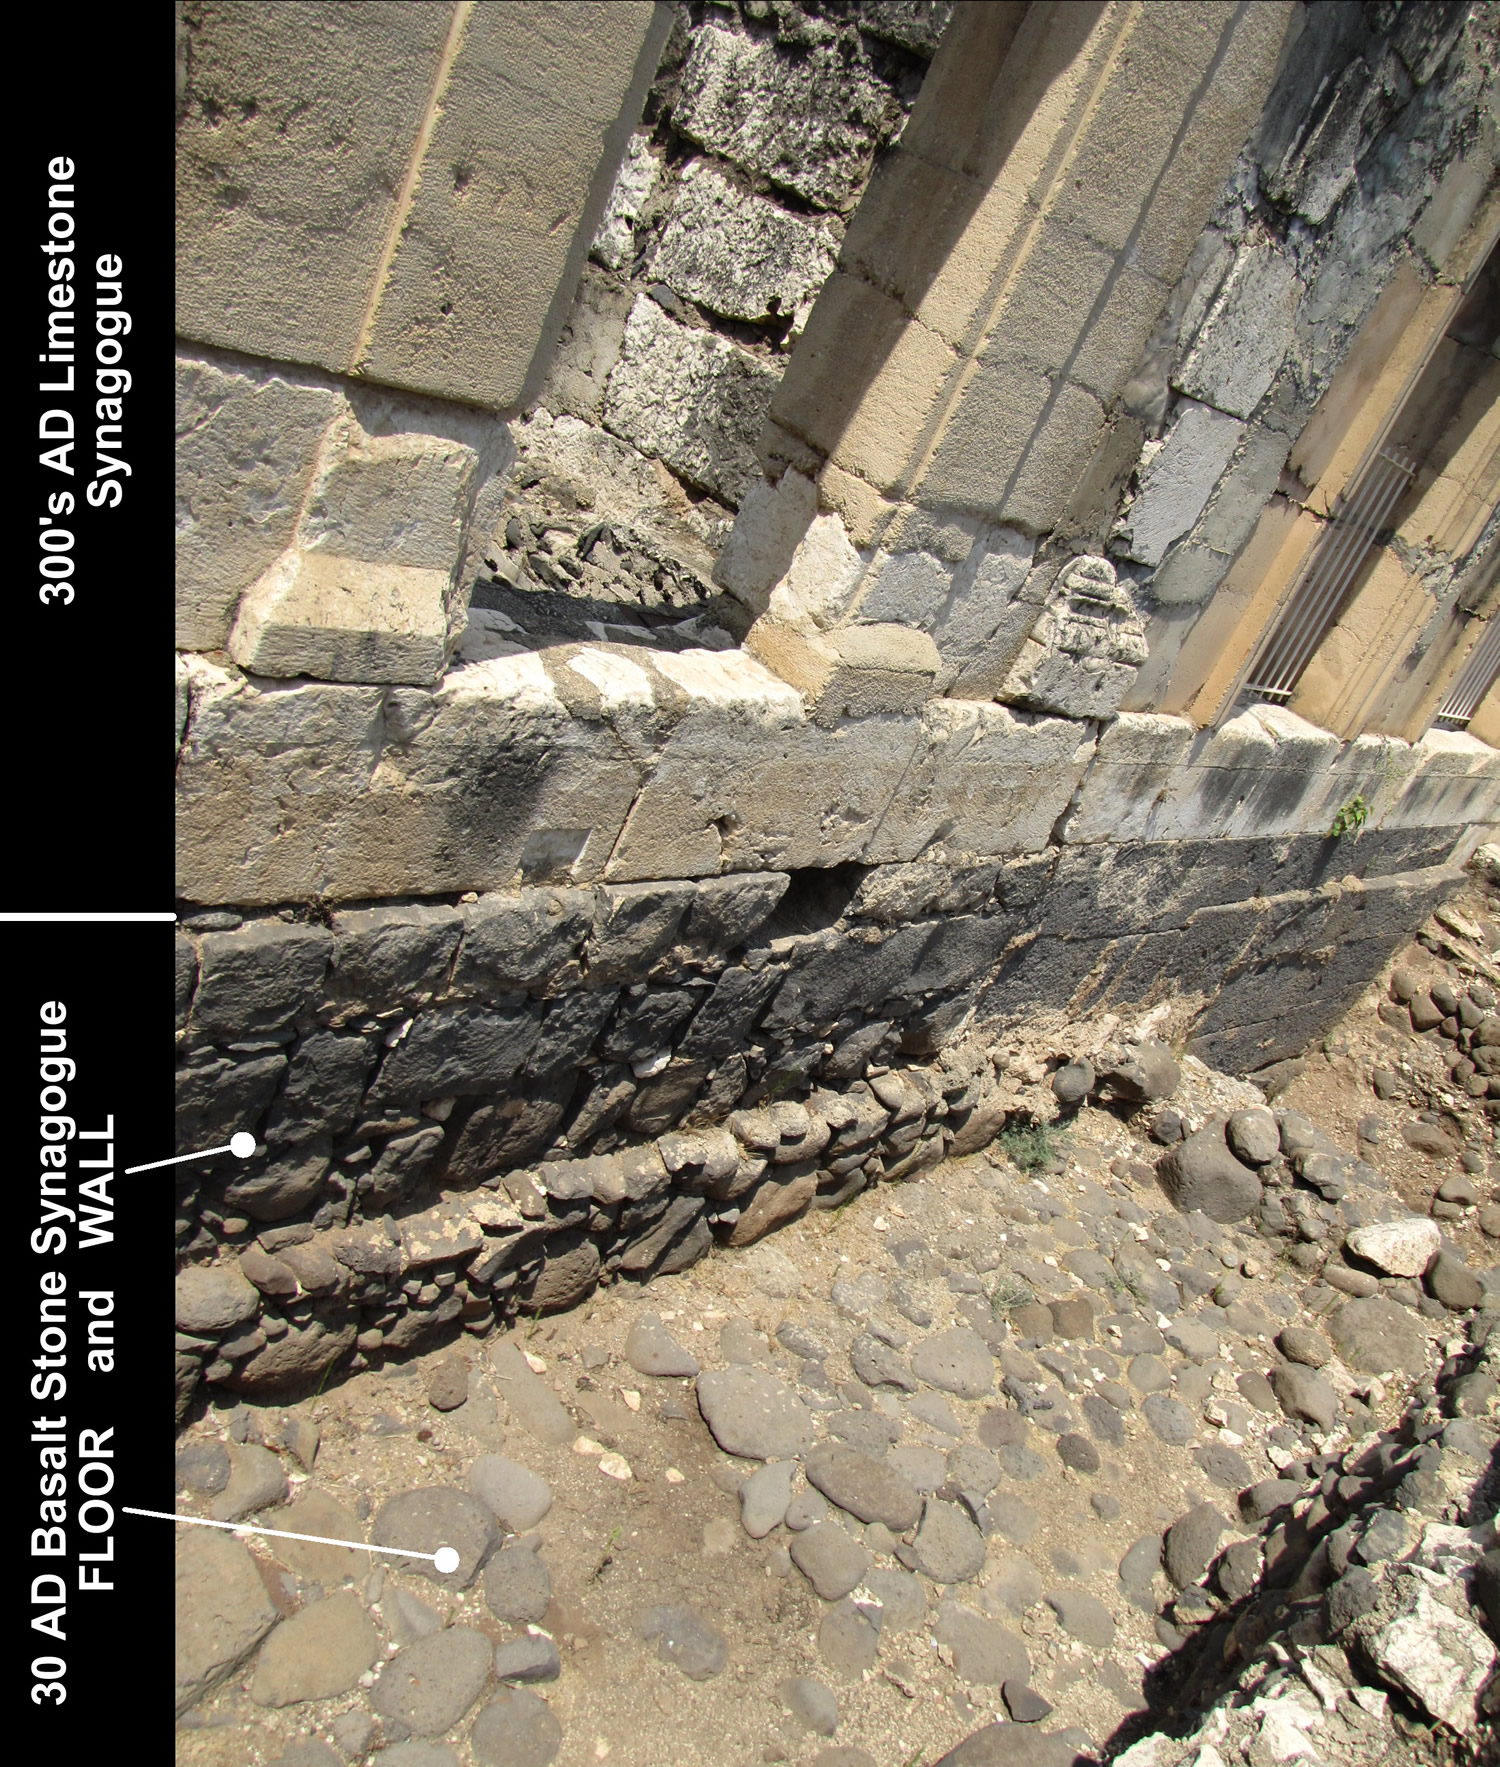 Capernaum Synagogue basalt walls from 30 AD first century